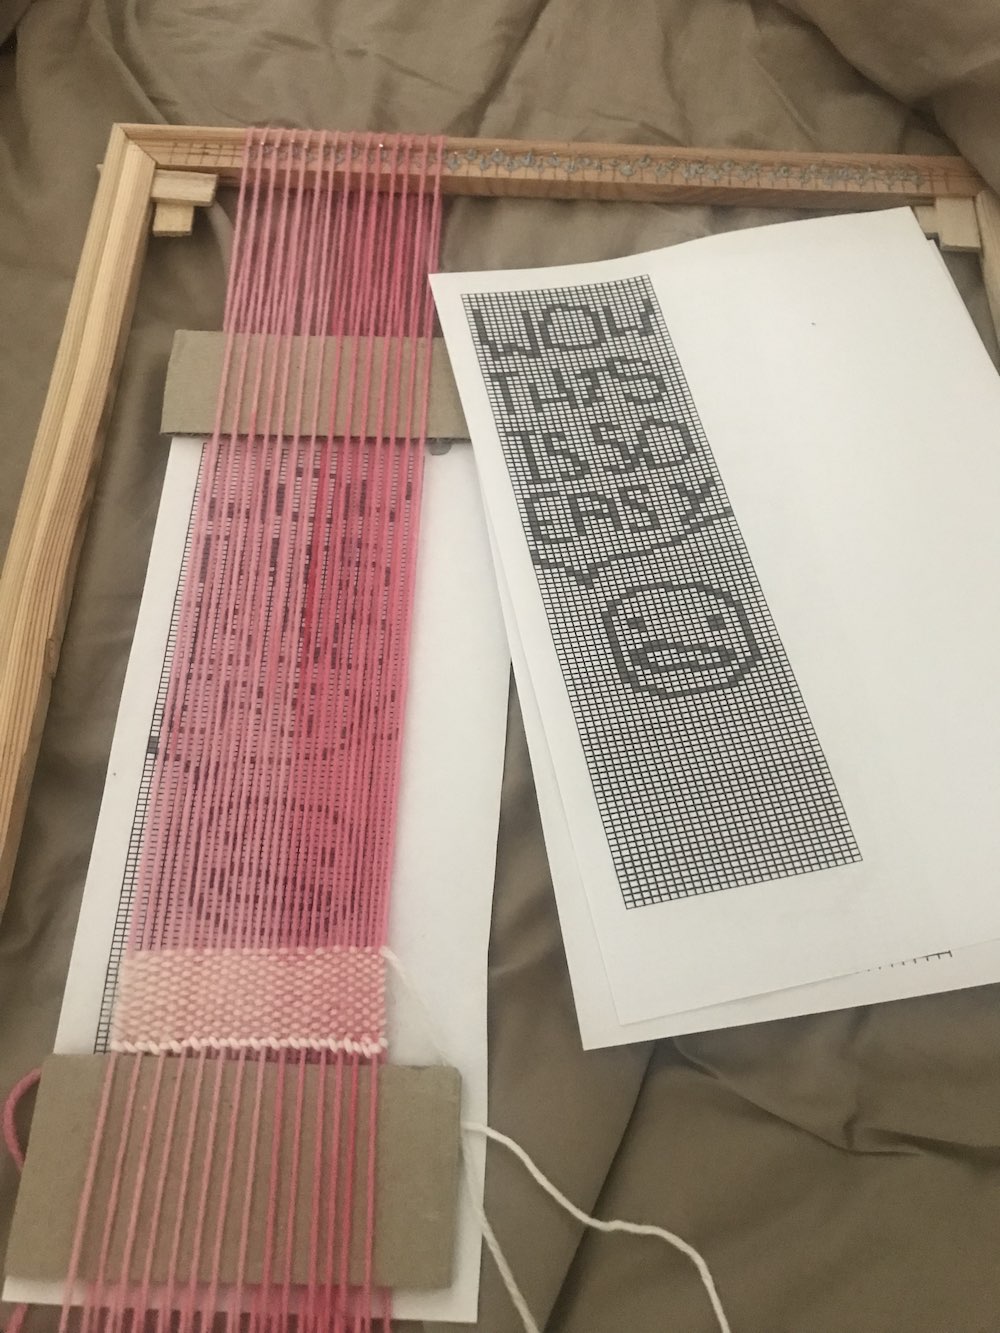 a loom on the bed with a tapestry started on it. There is a printed design behind the warp and a copy beside it, with a small face and text that reads "wow this is so easy"